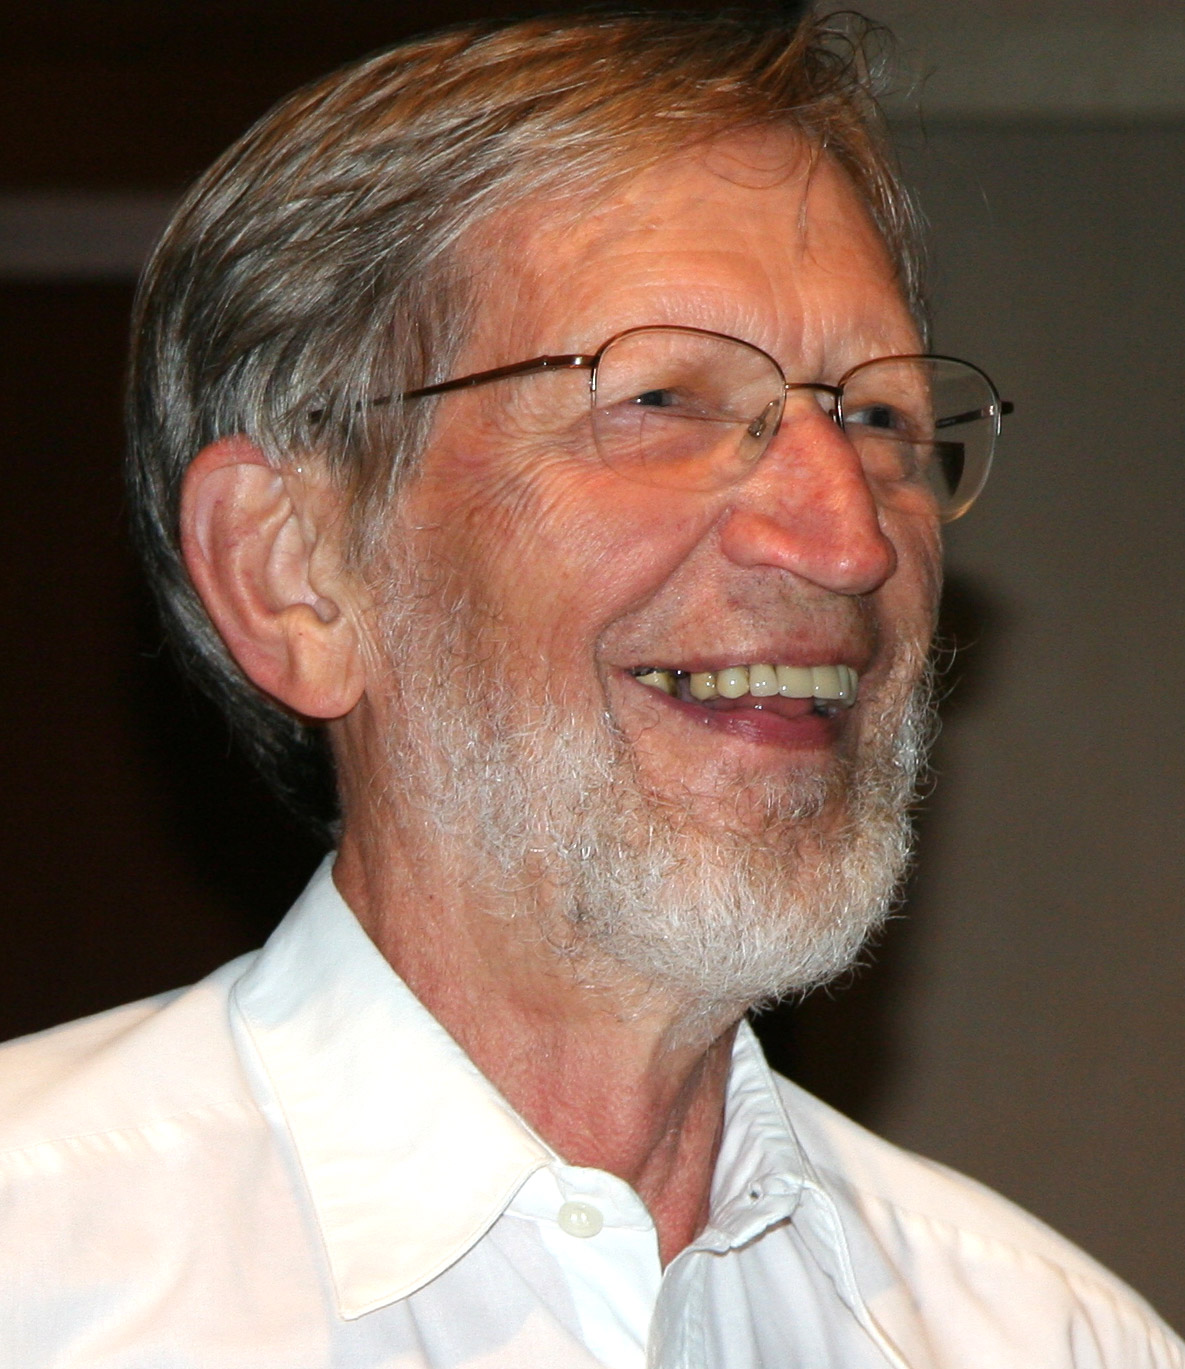 Alvin Plantinga after telling a joke at the beginning of a lecture on science and religion delivered at the Mayo Clinic in Rochester, Minnesota in 2009